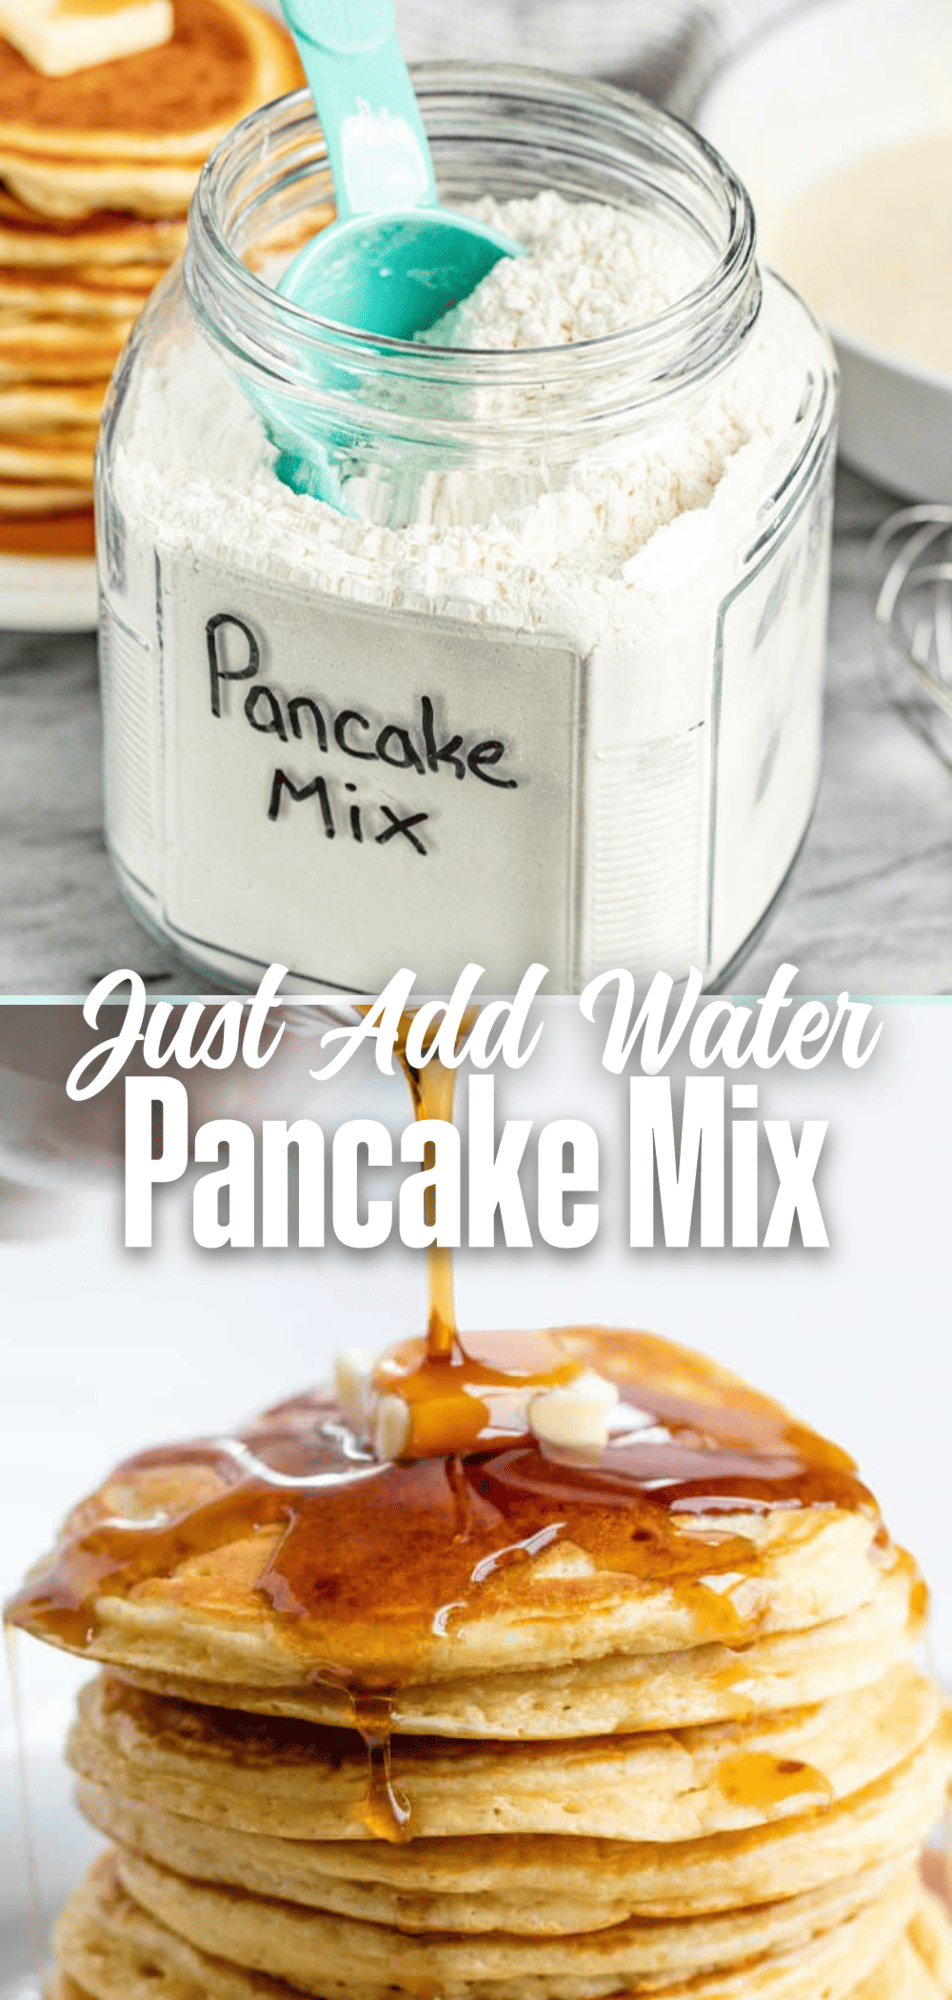 Easy Pancake Mix (Just add water!)